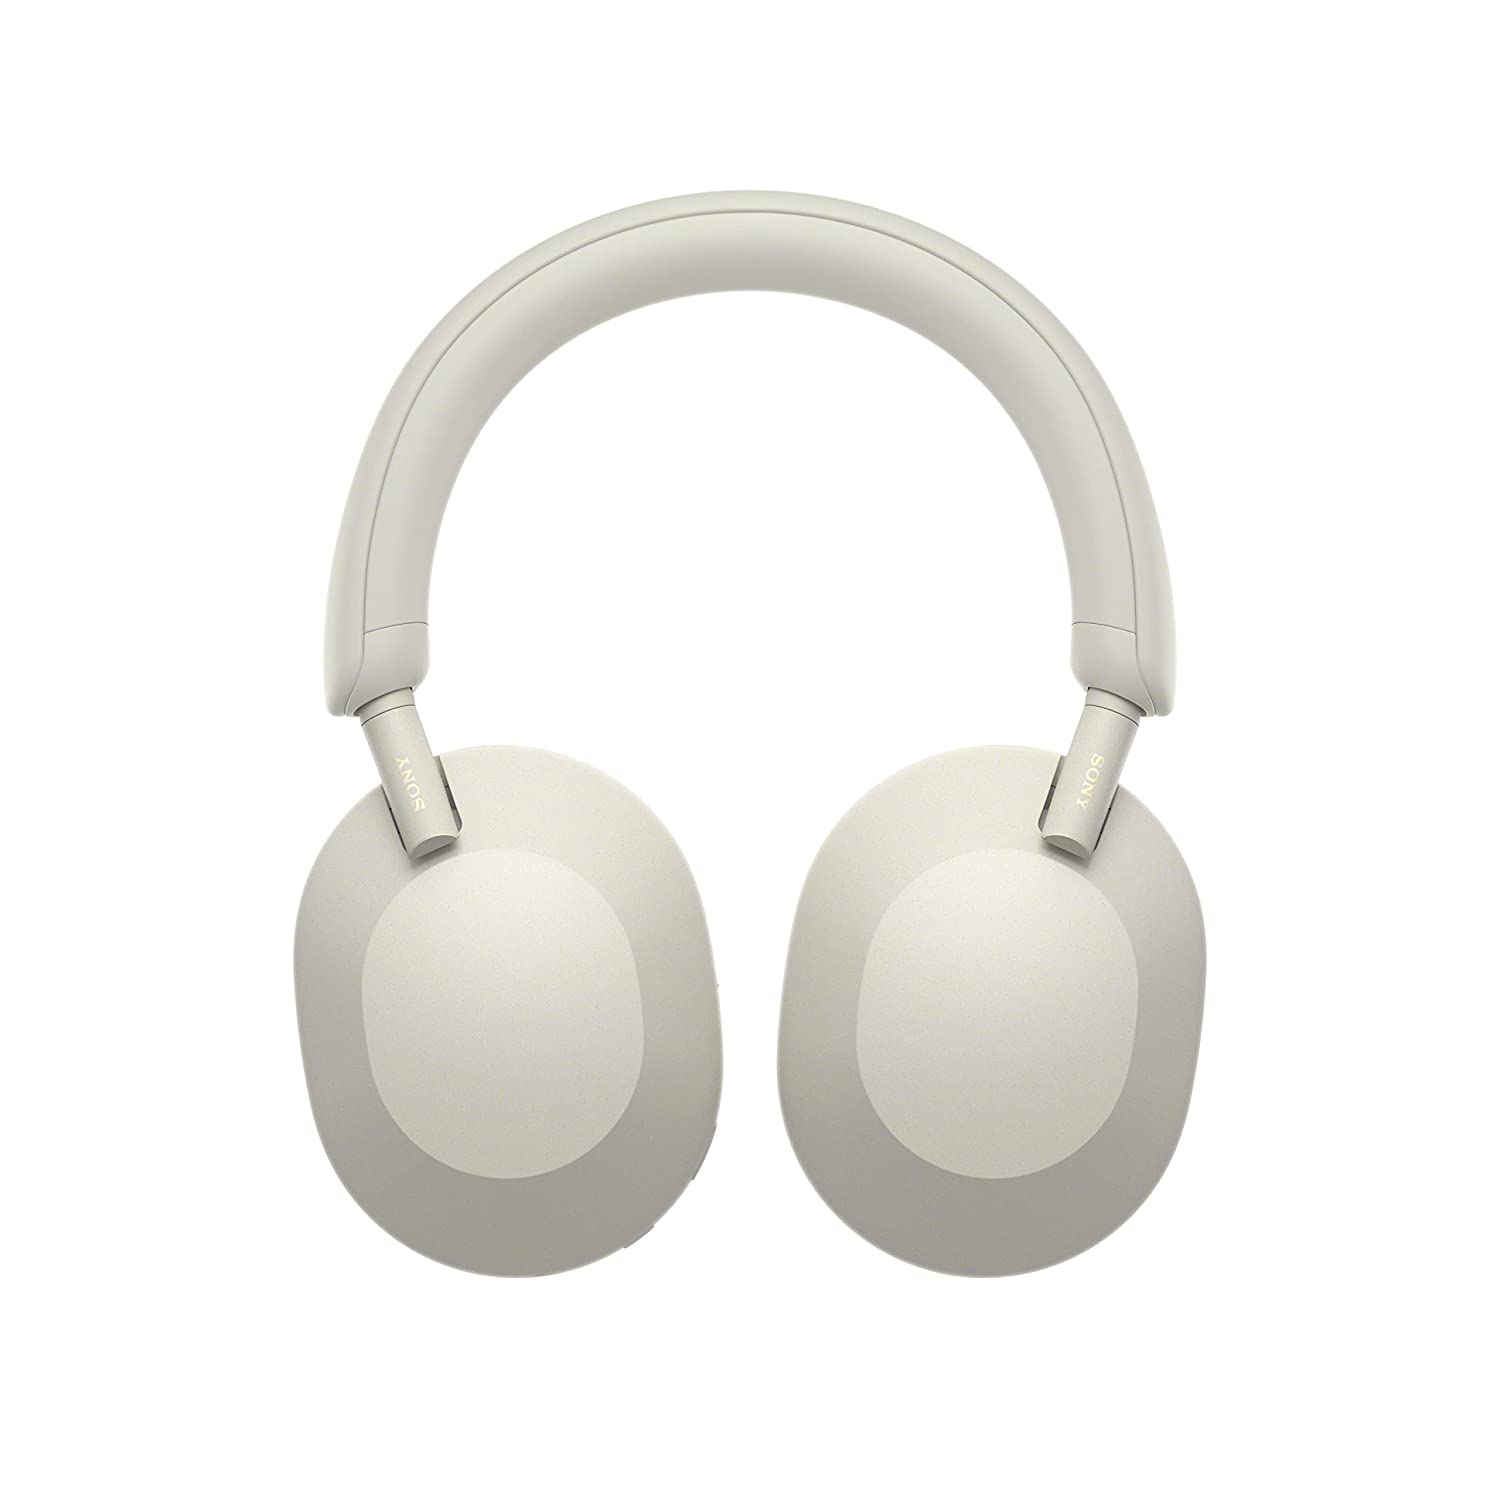  Sony WH-1000XM5 Wireless Noise Canceling Over-Ear